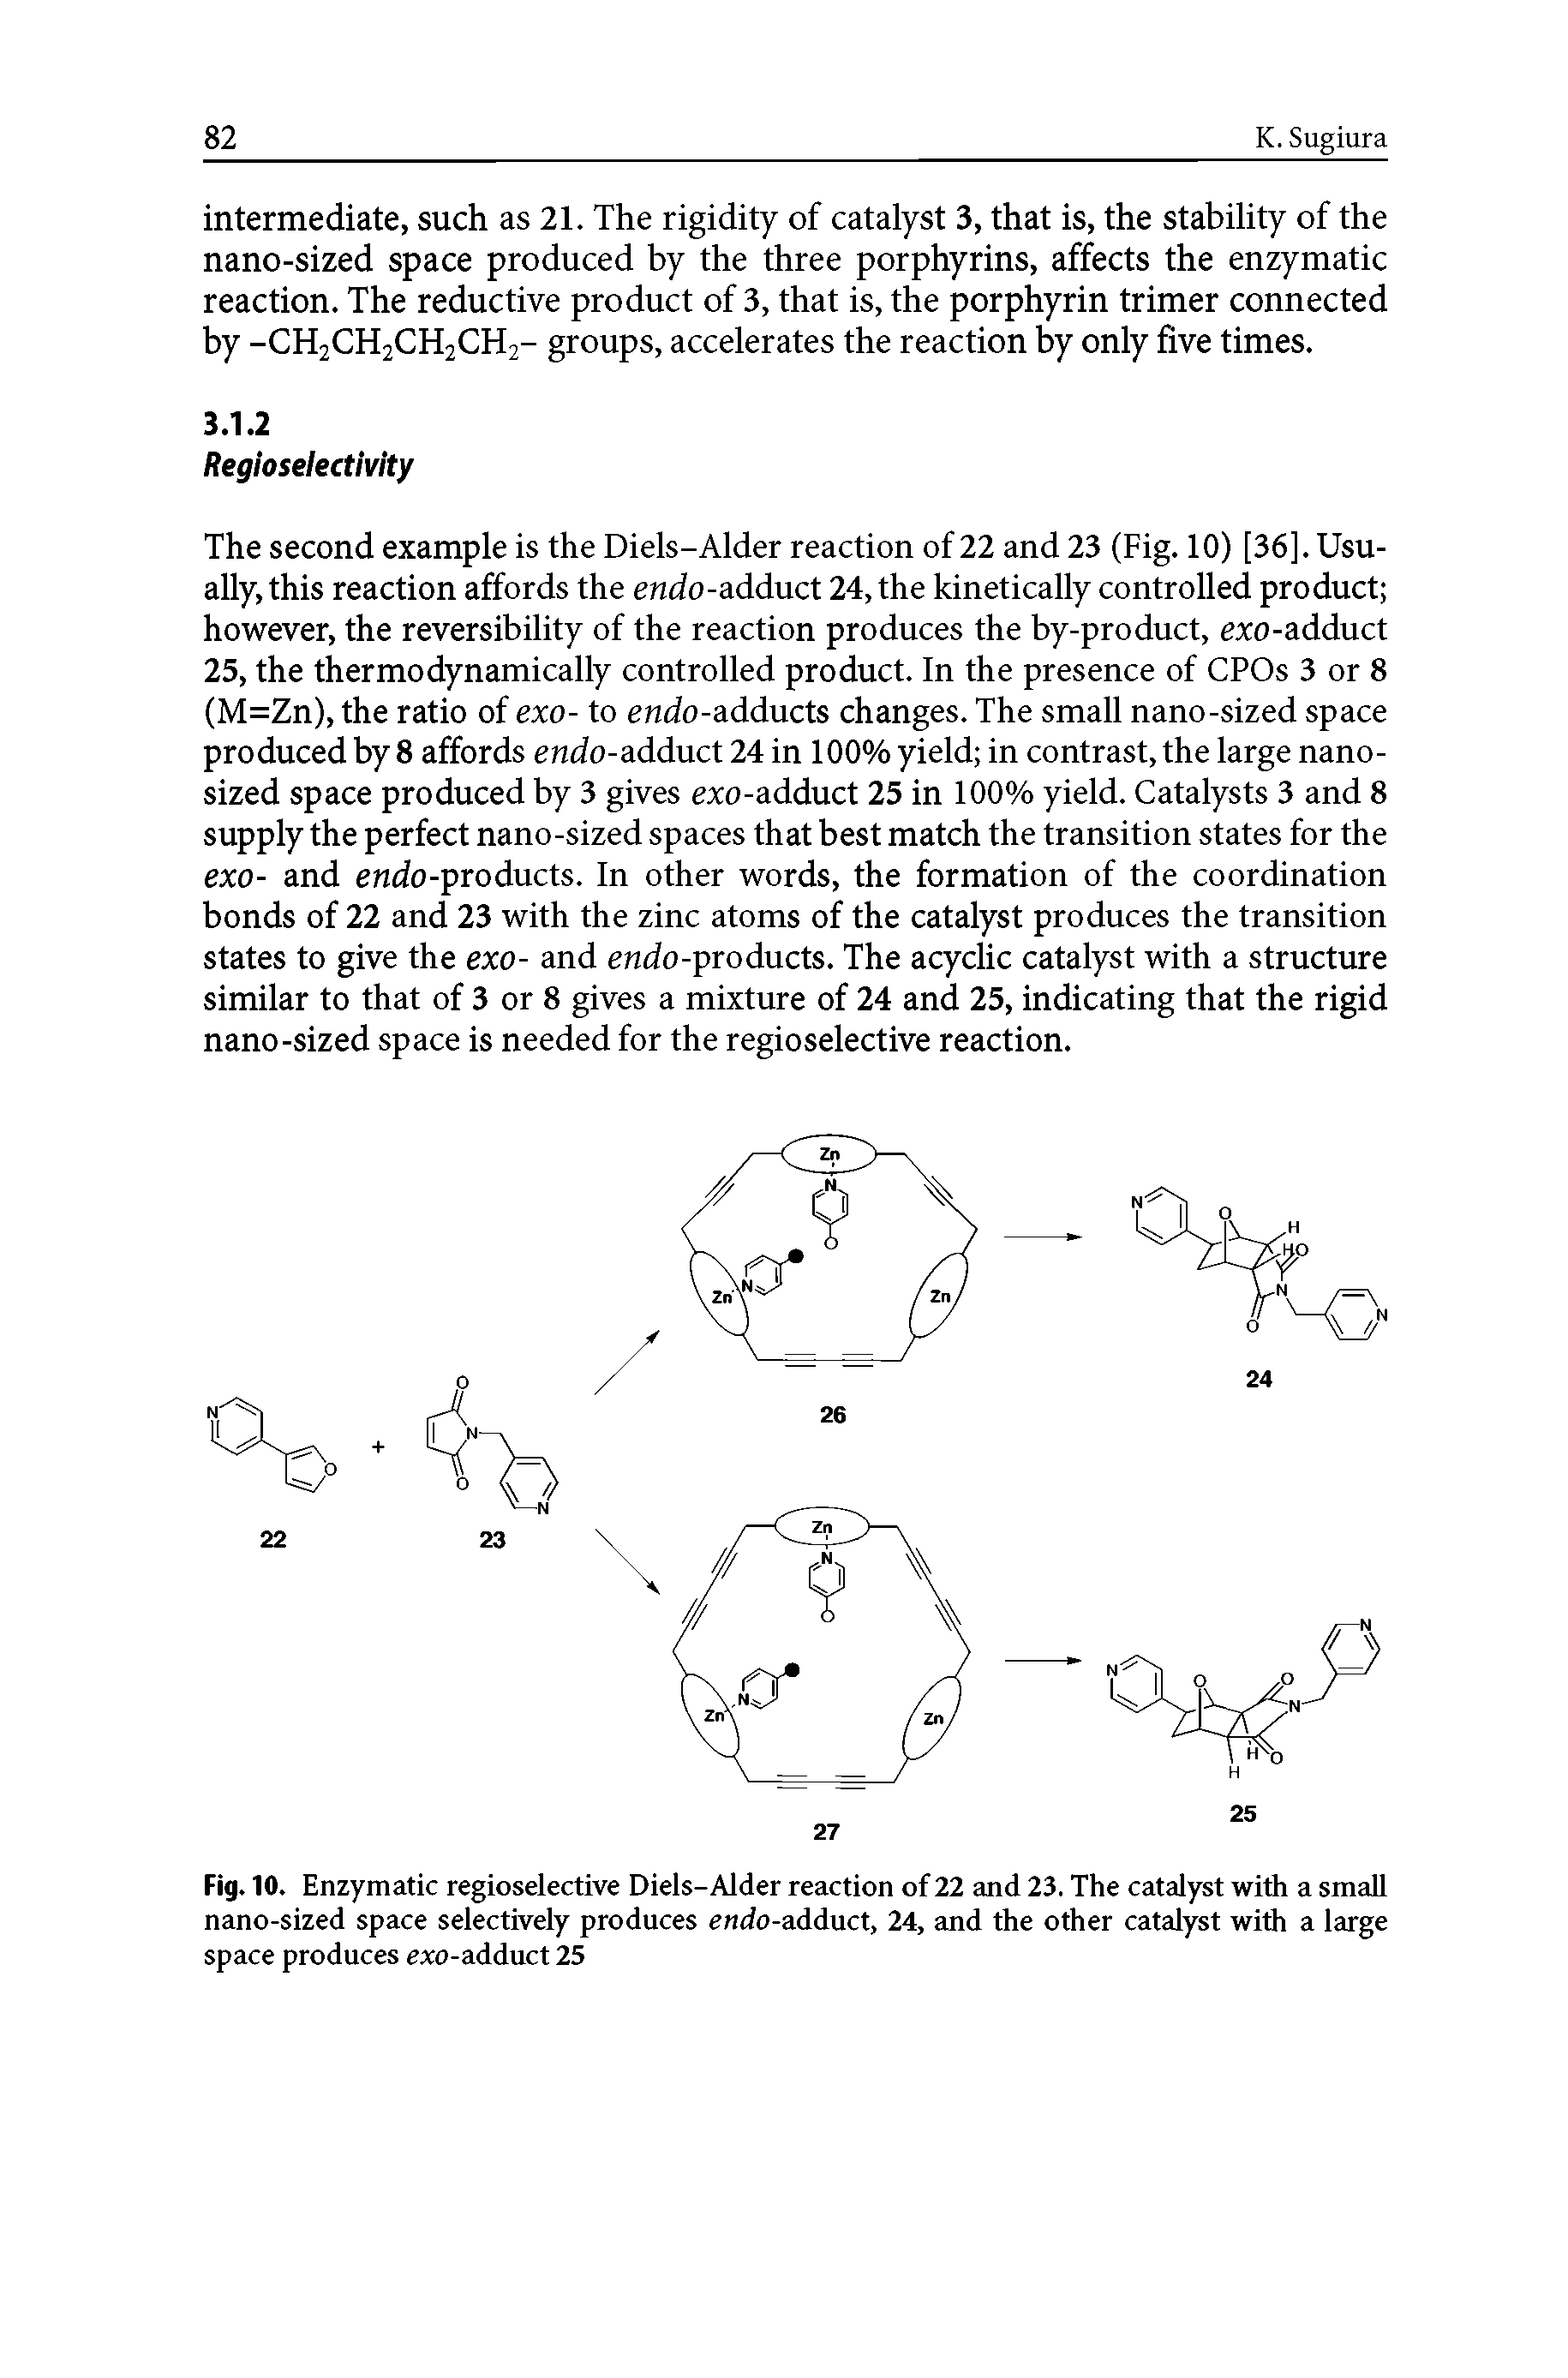 Fig. 10. Enzymatic regioselective Diels-Alder reaction of 22 and 23. The catalyst with a small nano-sized space selectively produces e/ido-adduct, 24, and the other catalyst with a large space produces exo-adduct 25...